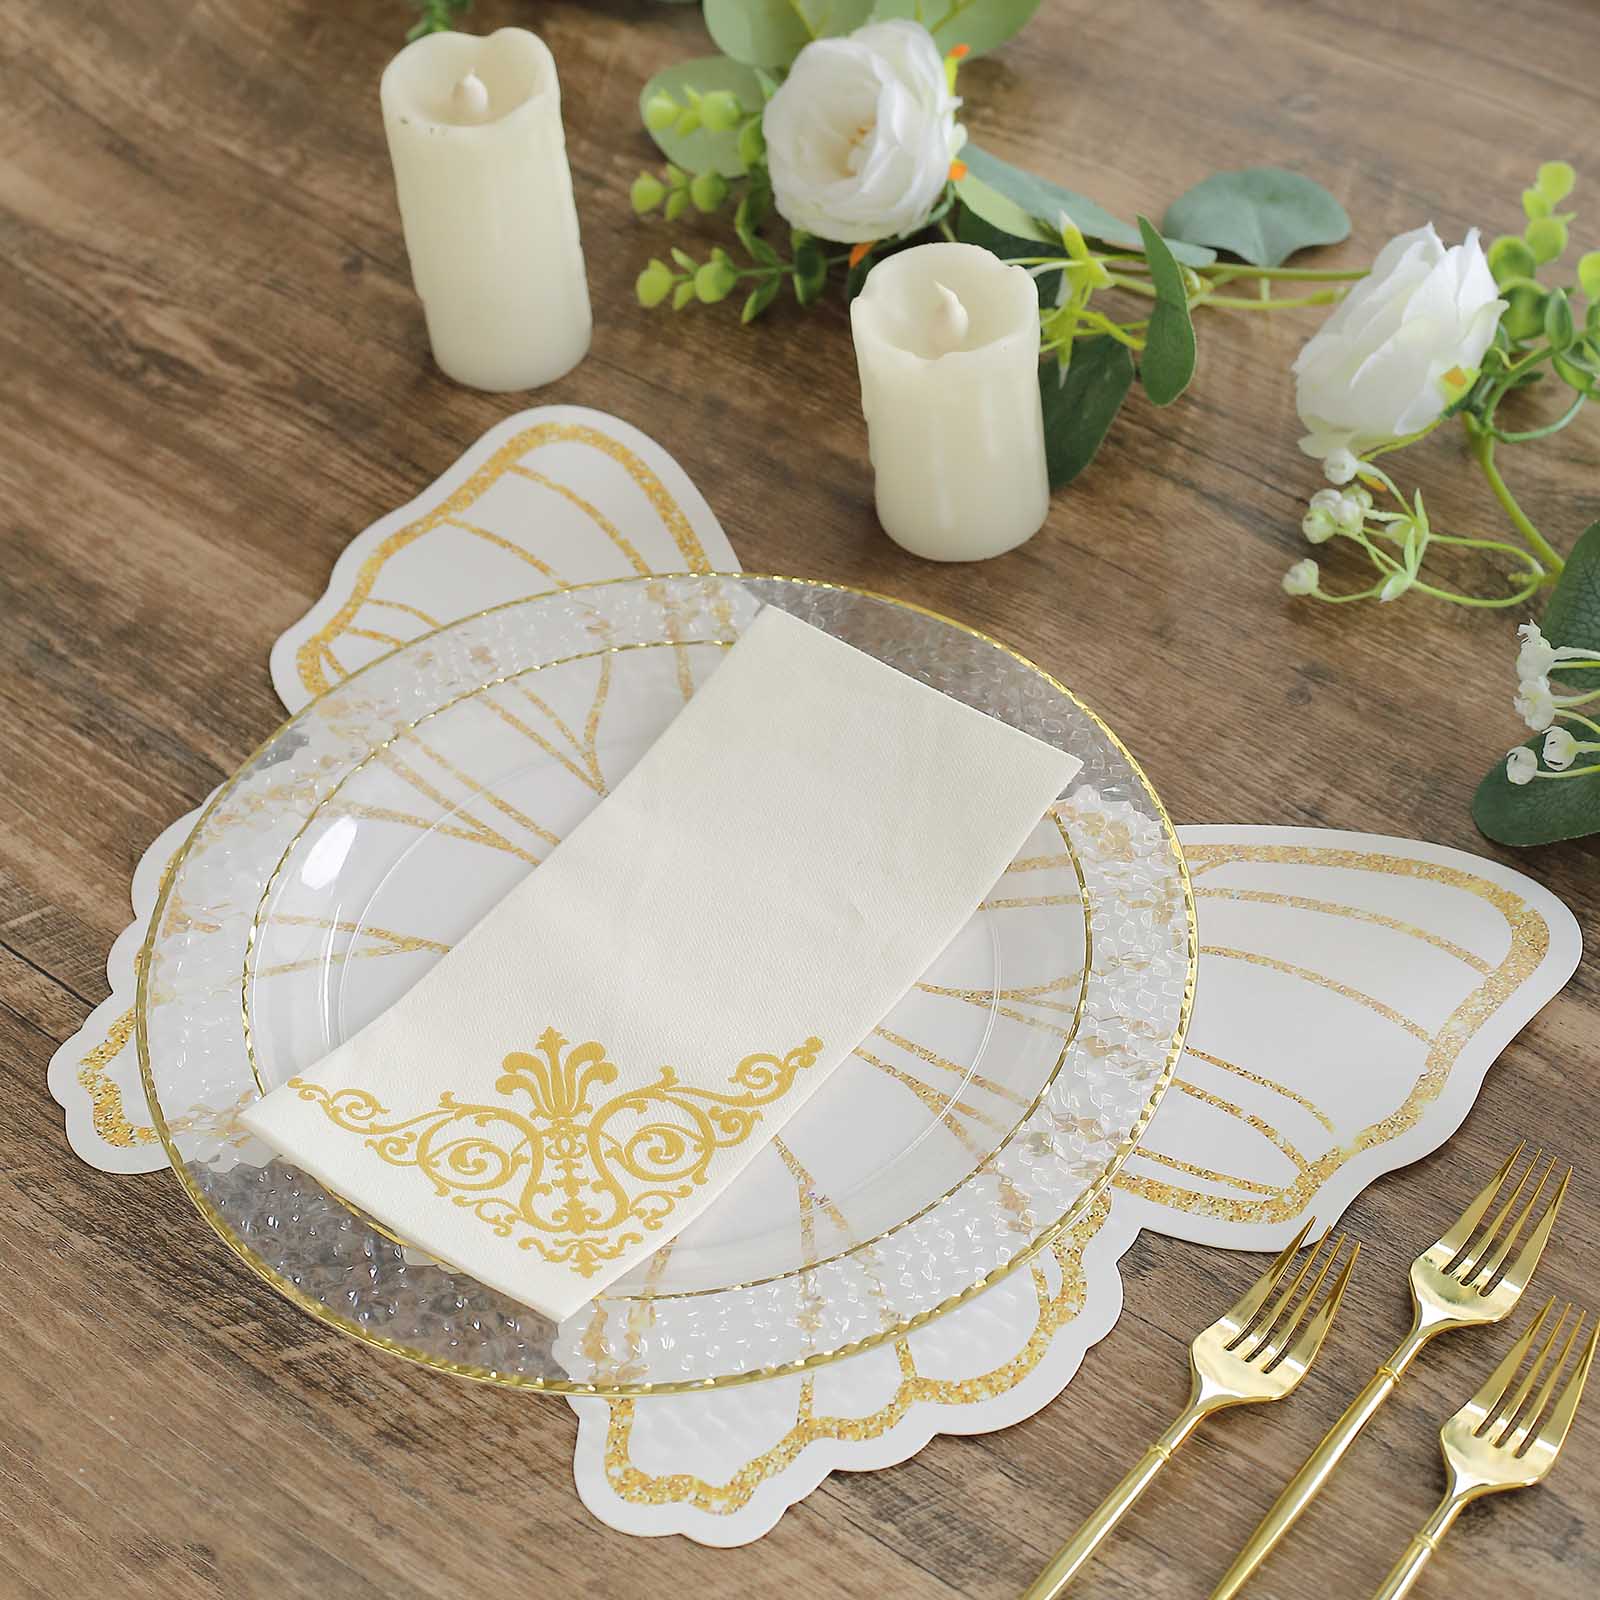 10 Pink with Gold Glitter Butterfly Cardboard Paper Placemats